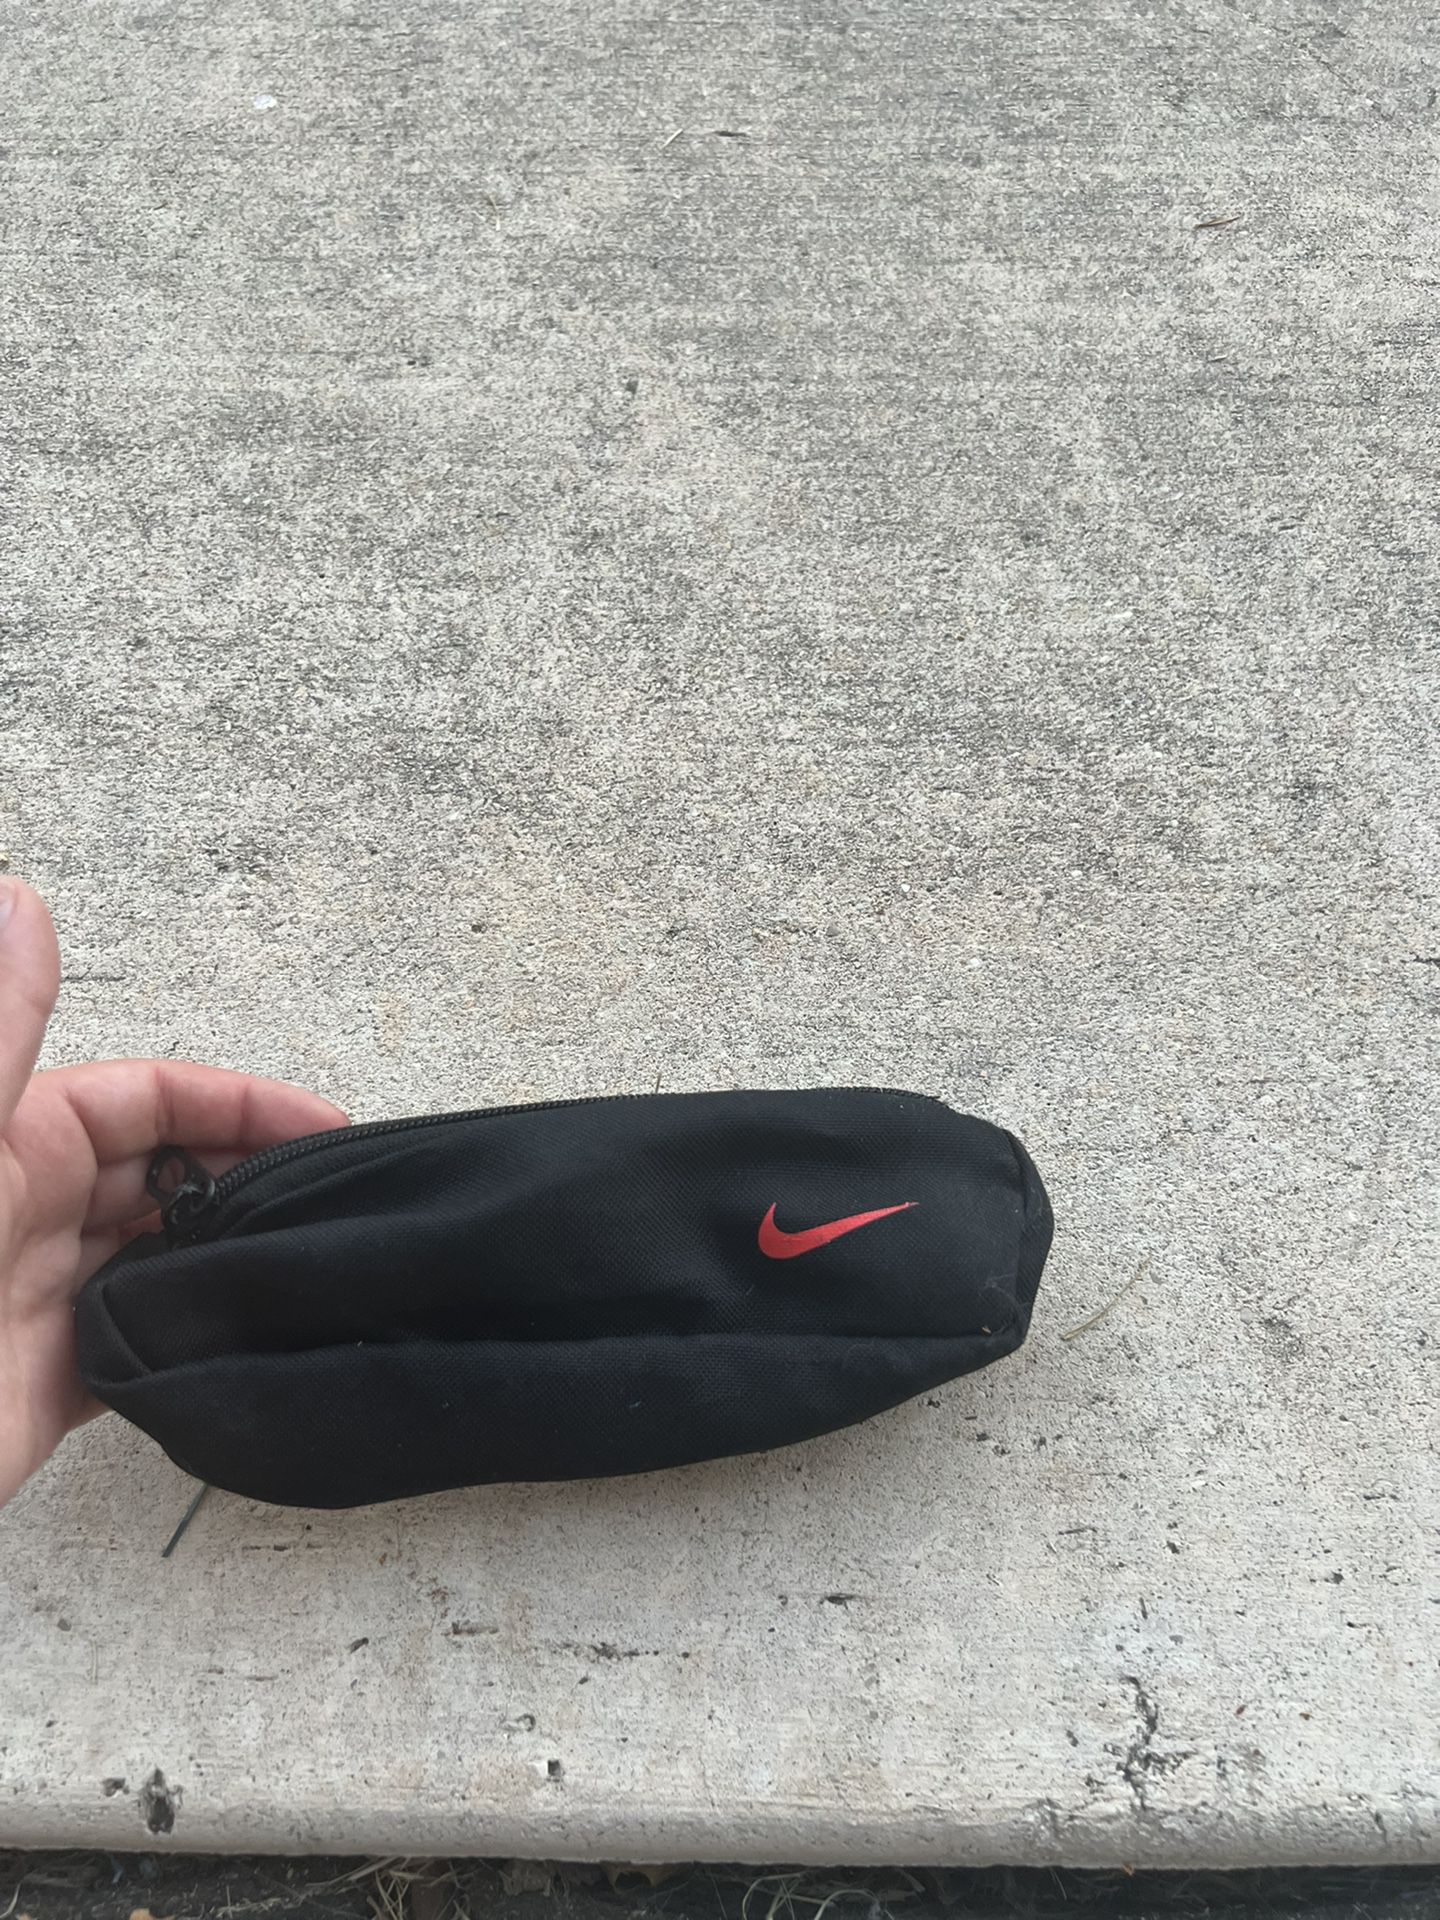 nike pencil pouch for Sale in San Antonio, TX - OfferUp